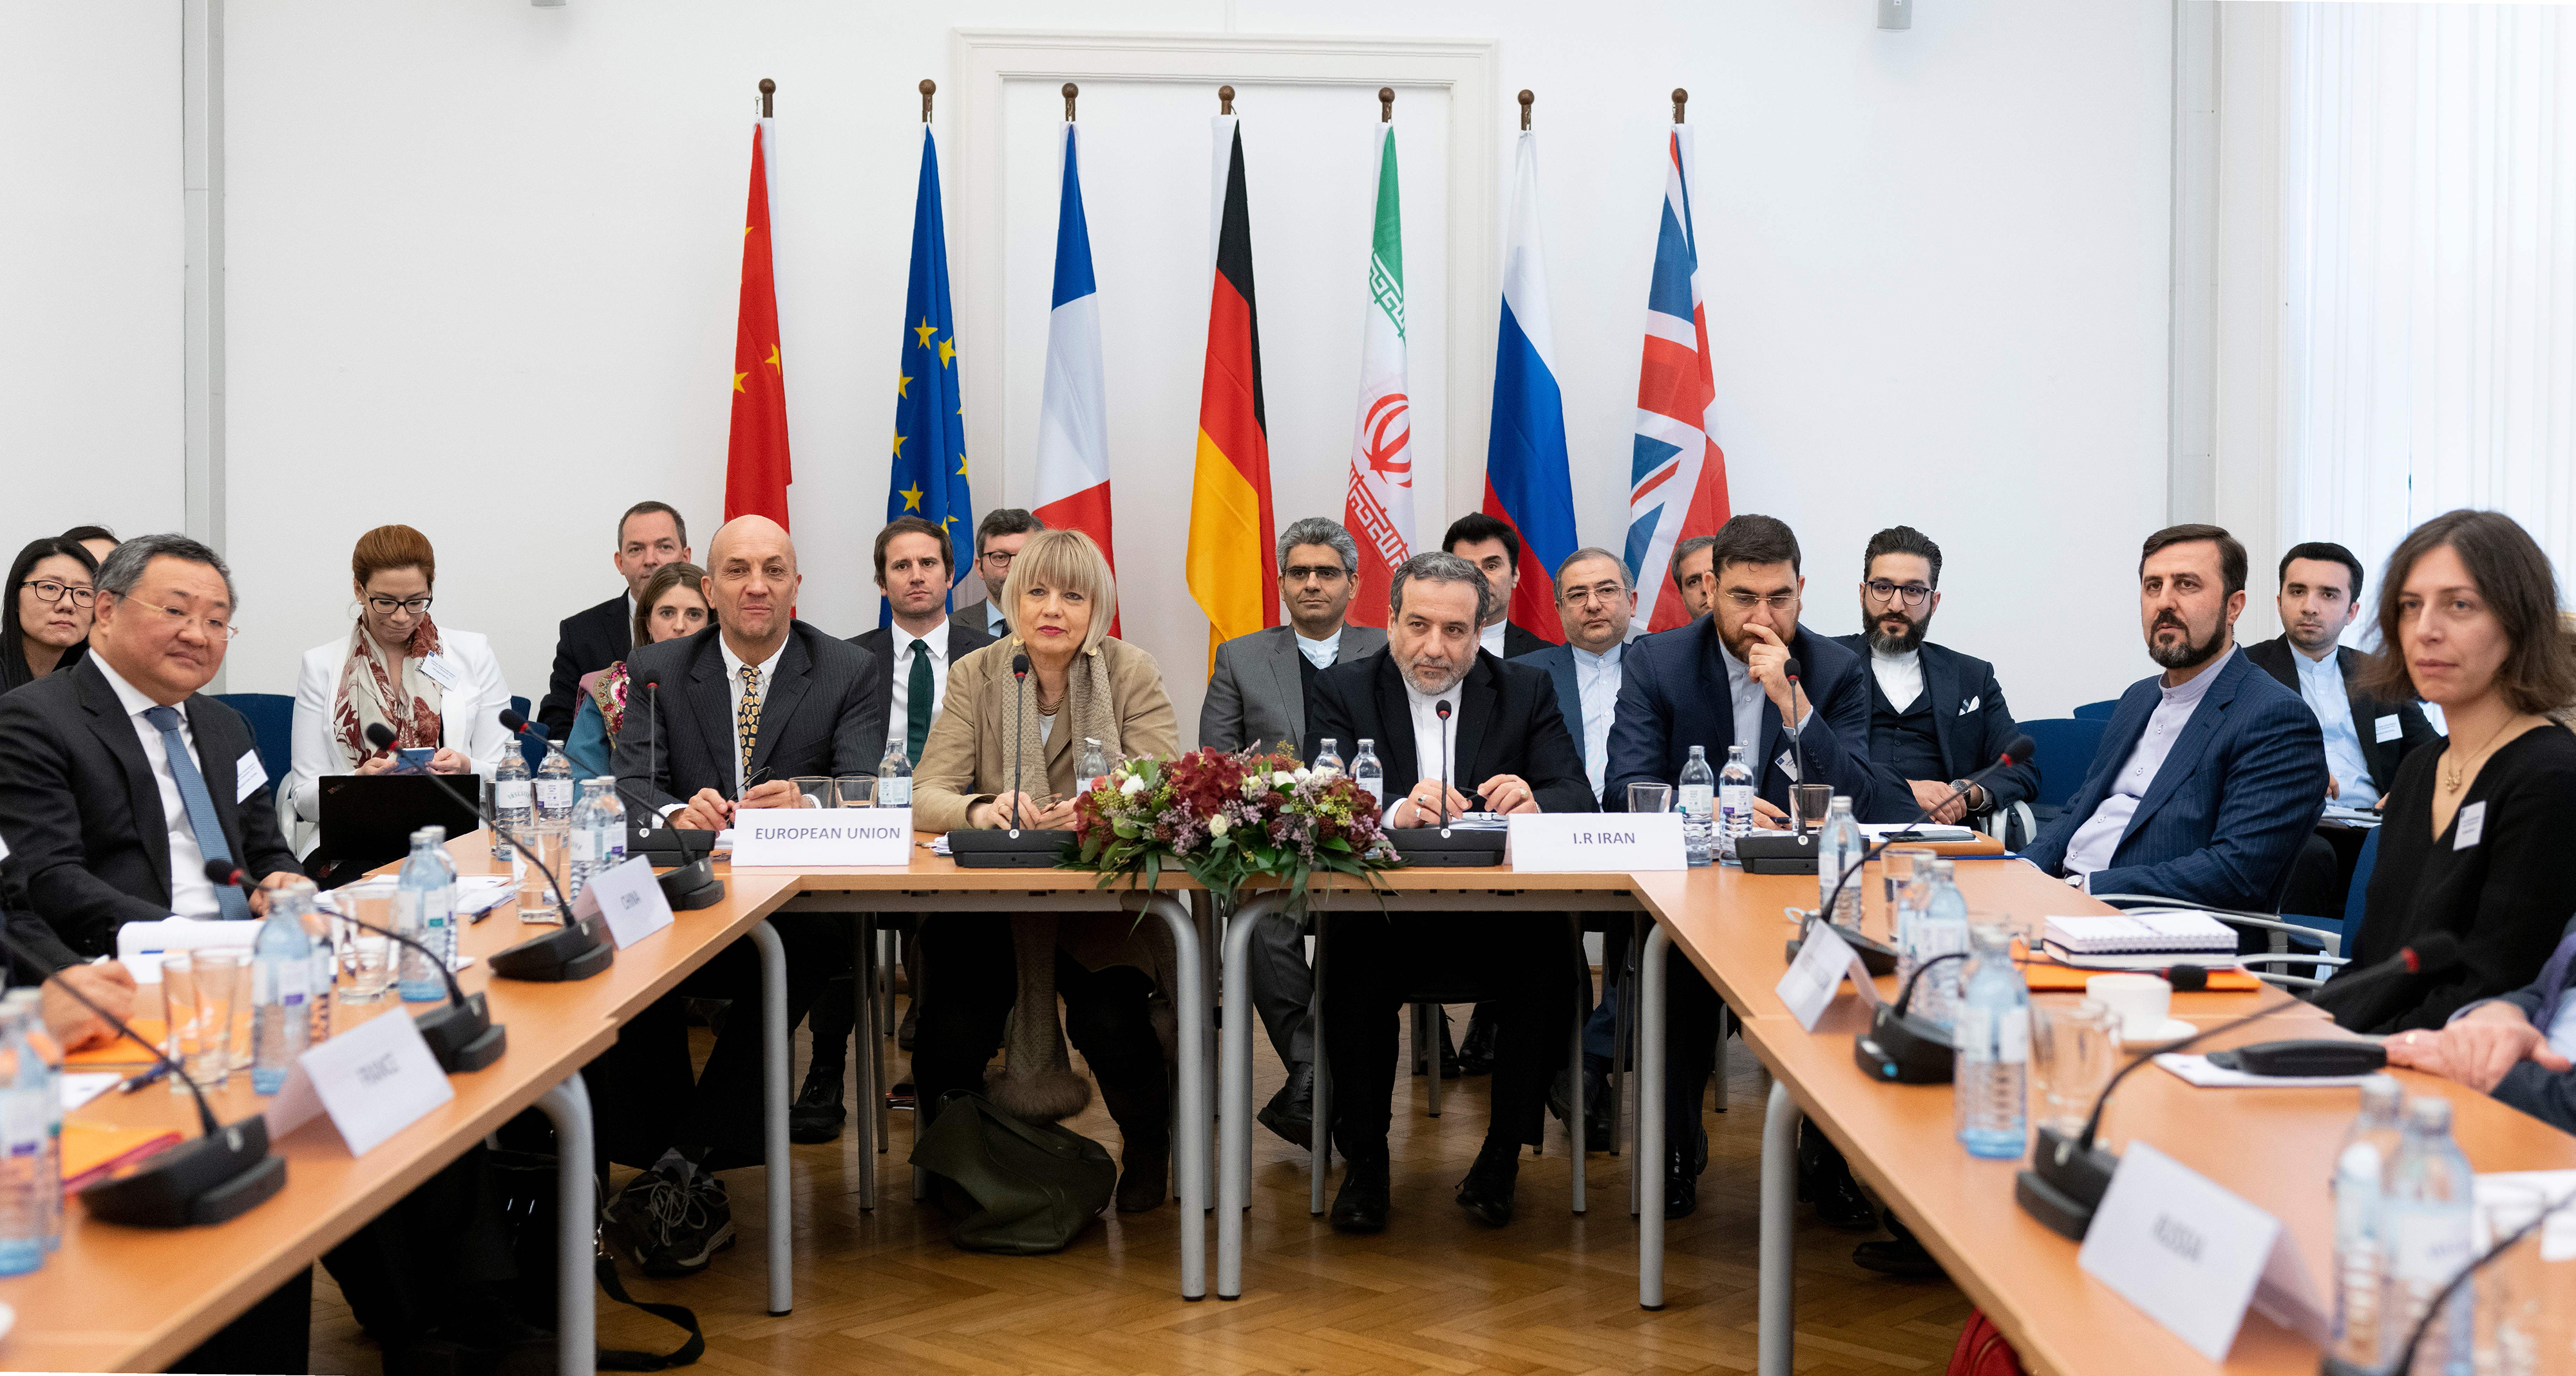 Leaders attend a meeting of the Joint Commission on Iran's nuclear program (JCPOA) at EU Delegation to the International Organizations office in Vienna, Austria, on December 6, 2019.